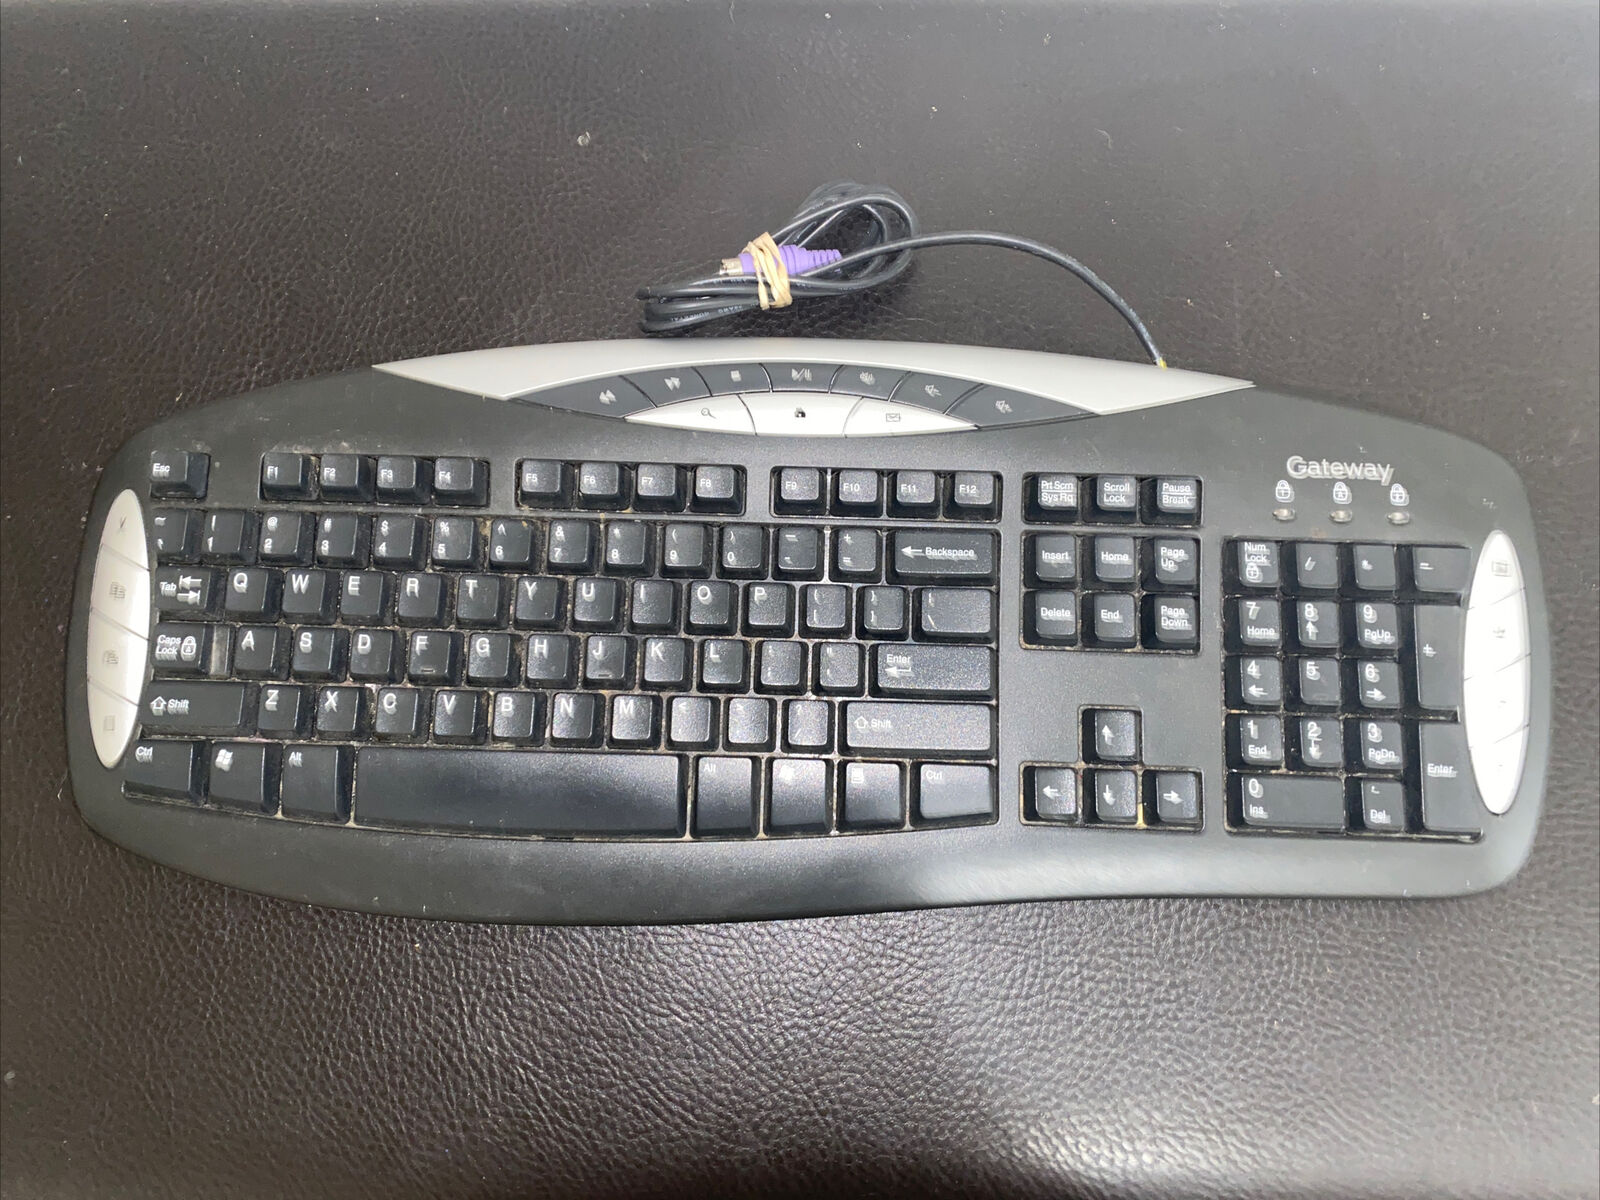 Gateway KB-0401 Black PS/2 Wired Keyboard TESTED